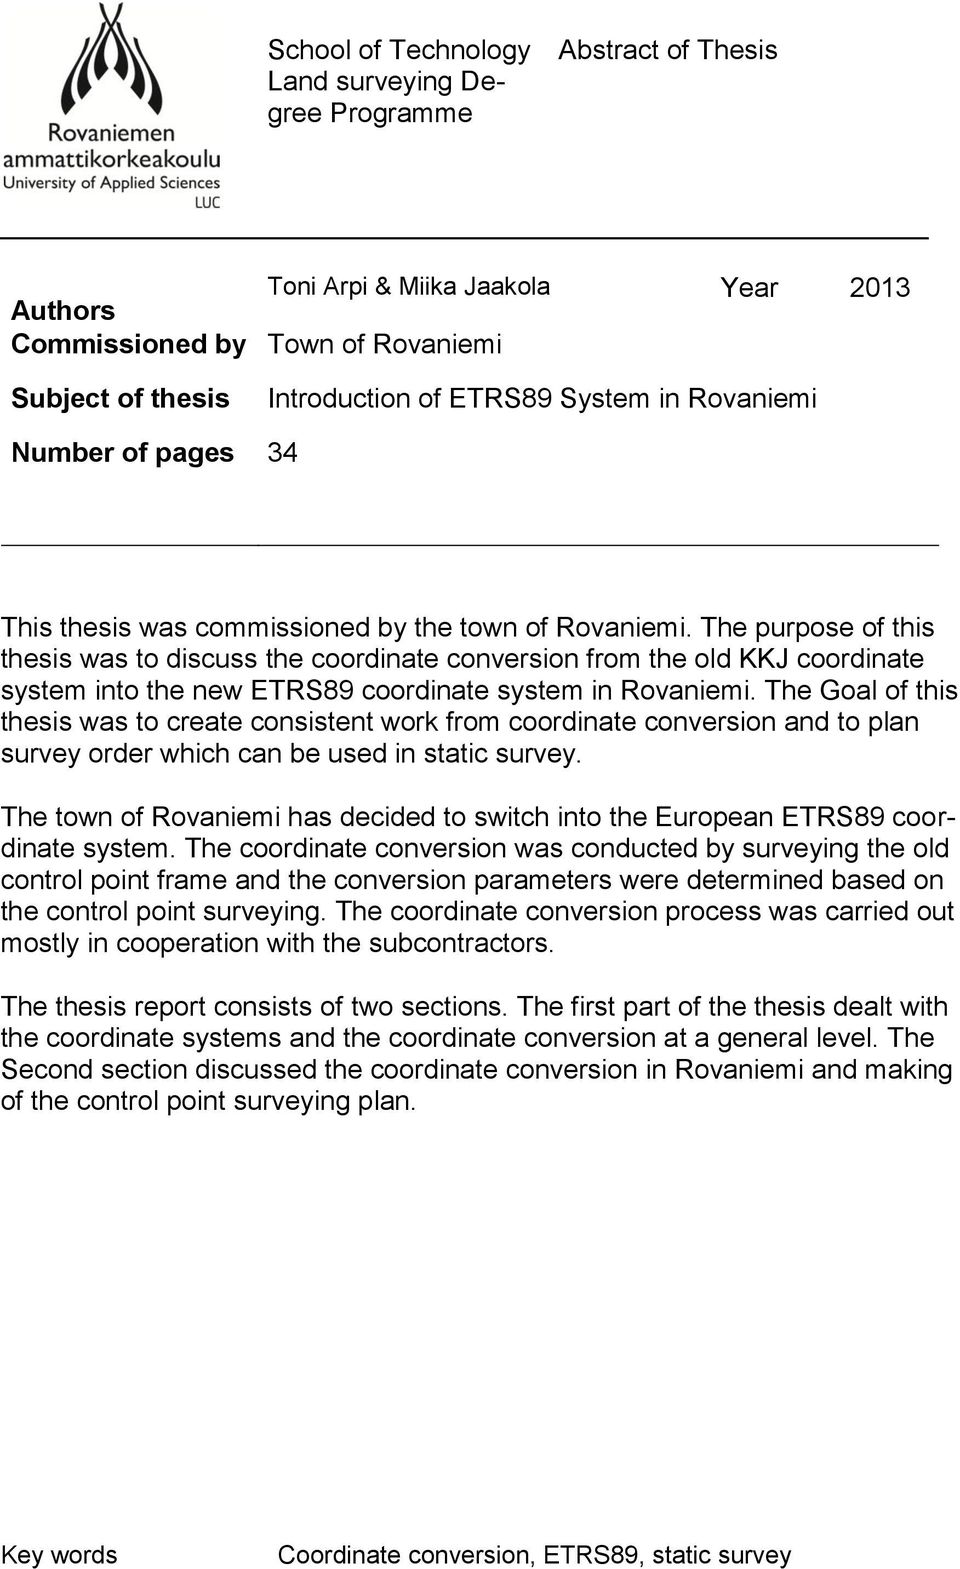 The purpose of this thesis was to discuss the coordinate conversion from the old KKJ coordinate system into the new ETRS89 coordinate system in Rovaniemi.